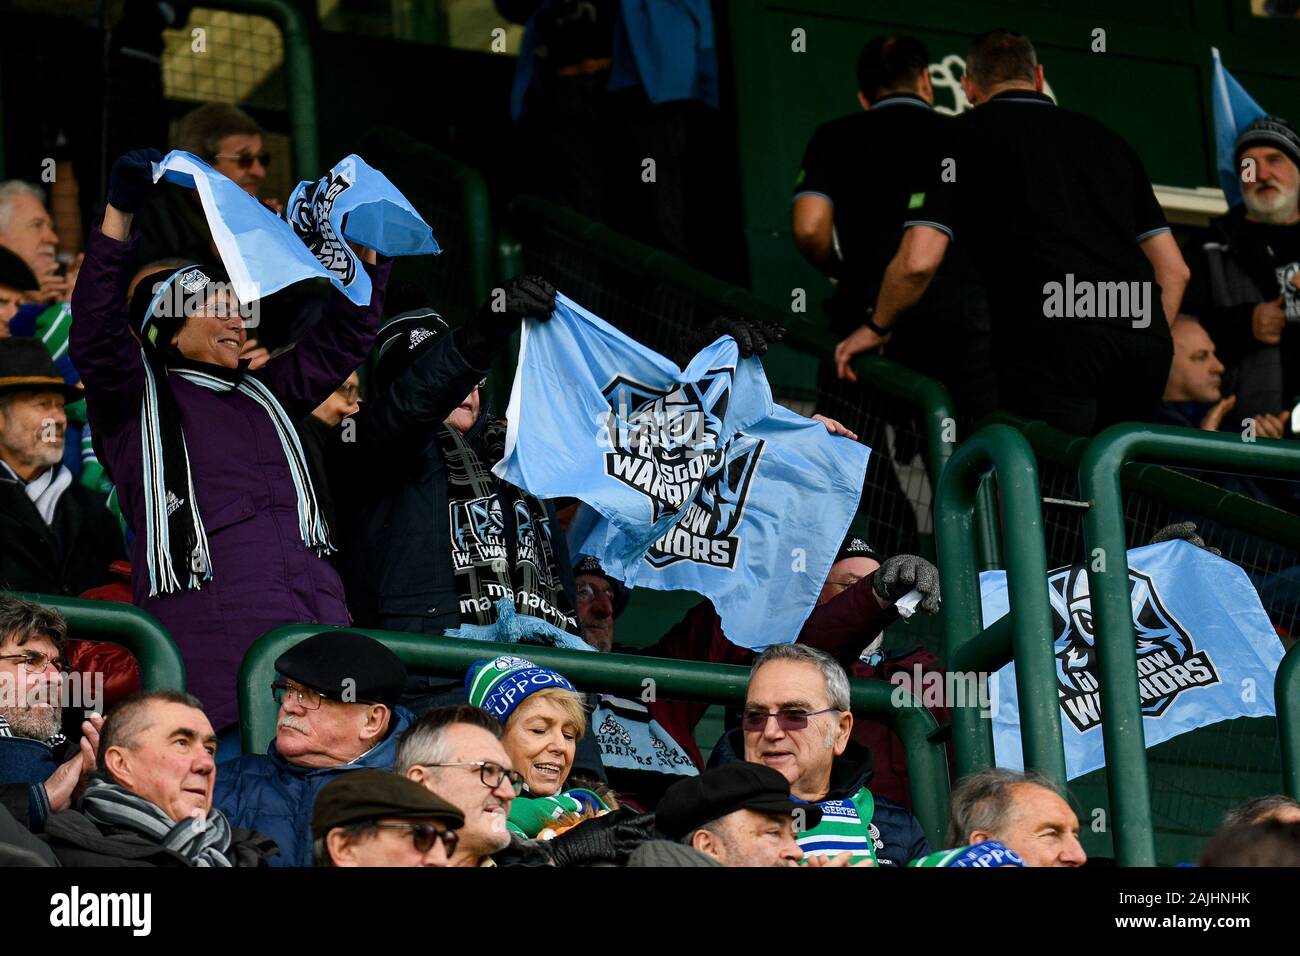 Treviso, Italy.  4th Jan, 2020. fans glasgow warriorsduring Benetton Treviso vs Glasgow Warriors, Rugby Guinness Pro 14 in Treviso, Italy, January 04 2020 - LPS/Ettore Griffoni Credit: Ettore Griffoni/LPS/ZUMA Wire/Alamy Live News Stock Photo